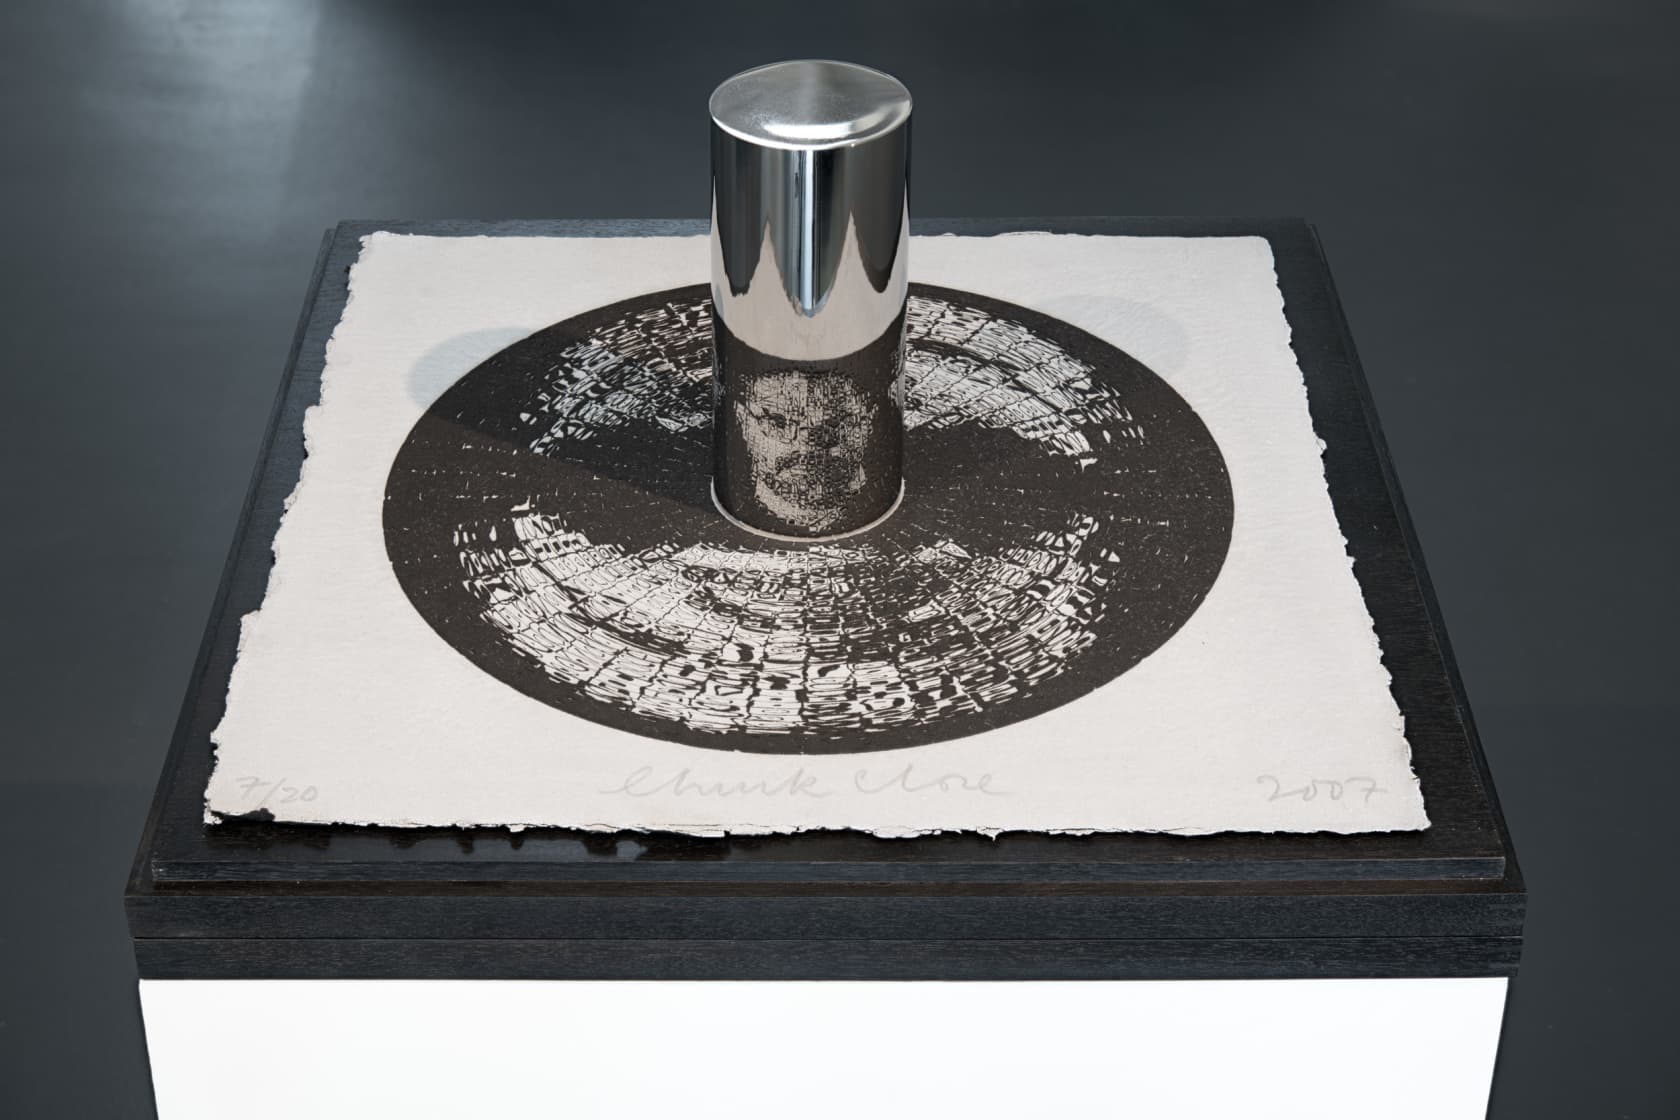 Chuck Close Self-Portrait (anamorphic) Engraving with embossment on black Twinrocker handmade paper, polished stainless steel cylinder, and wooden platform